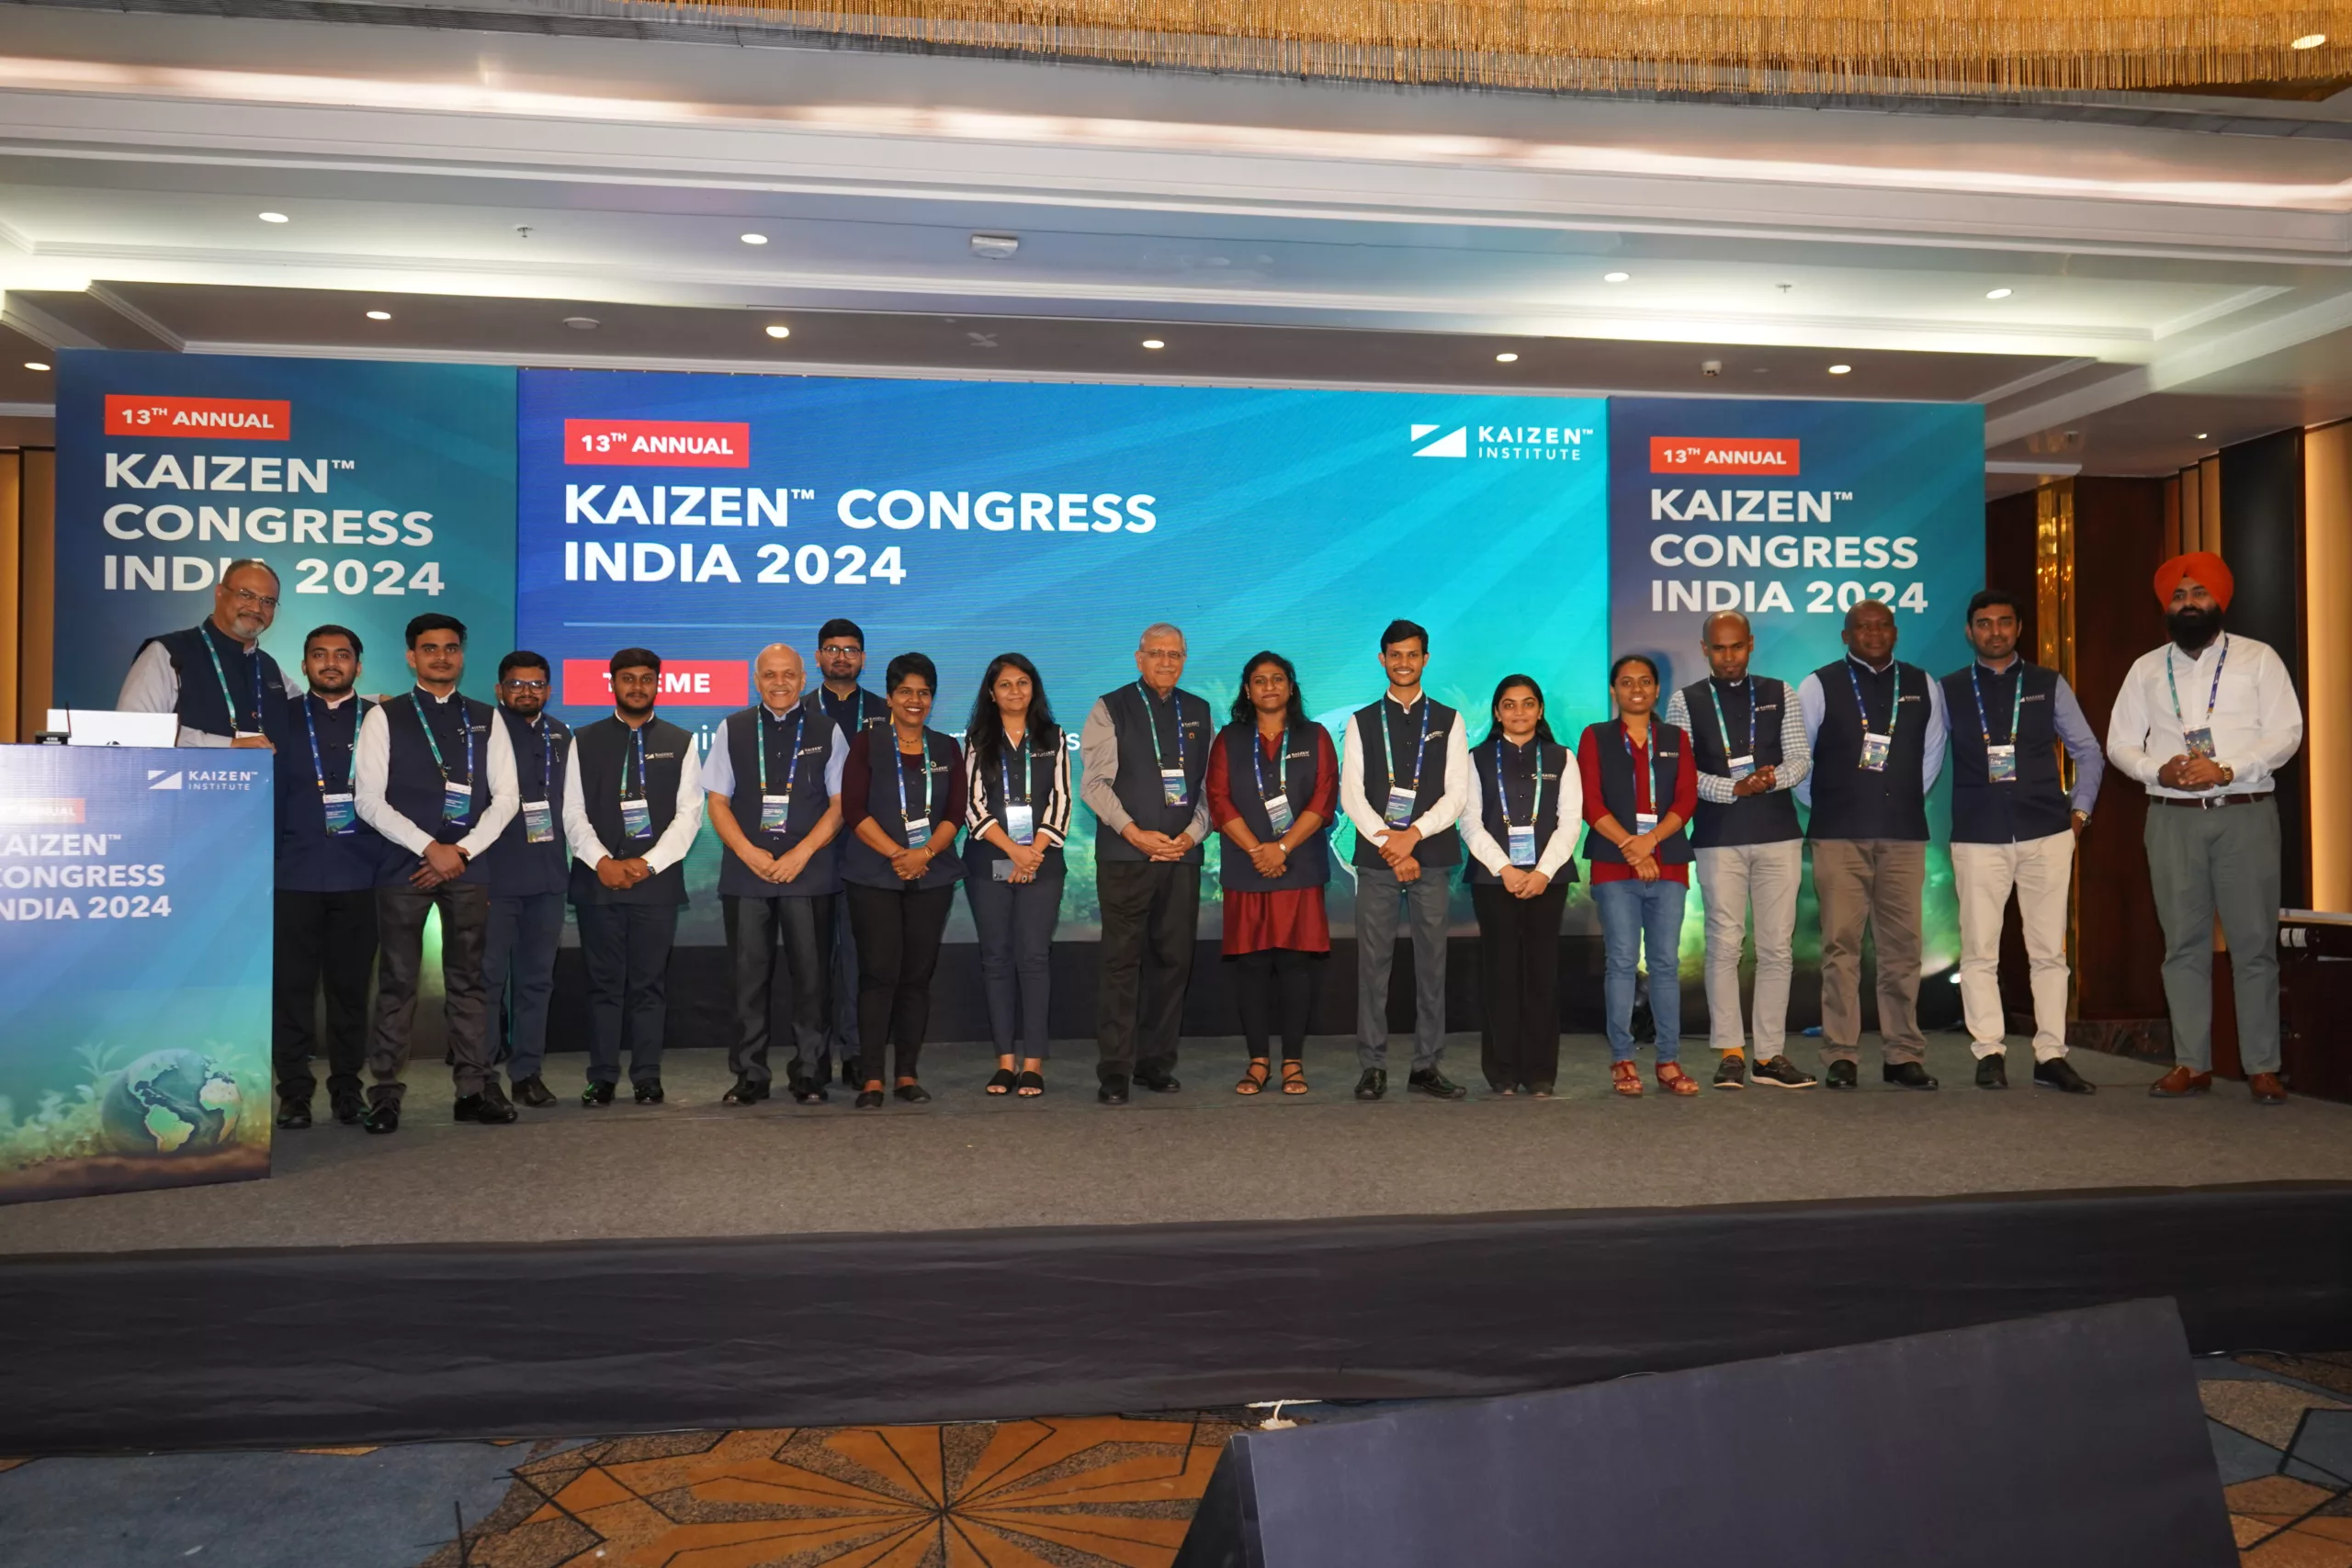 Advocating for Strong ESG Strategies at KAIZEN™ Congress India 2024